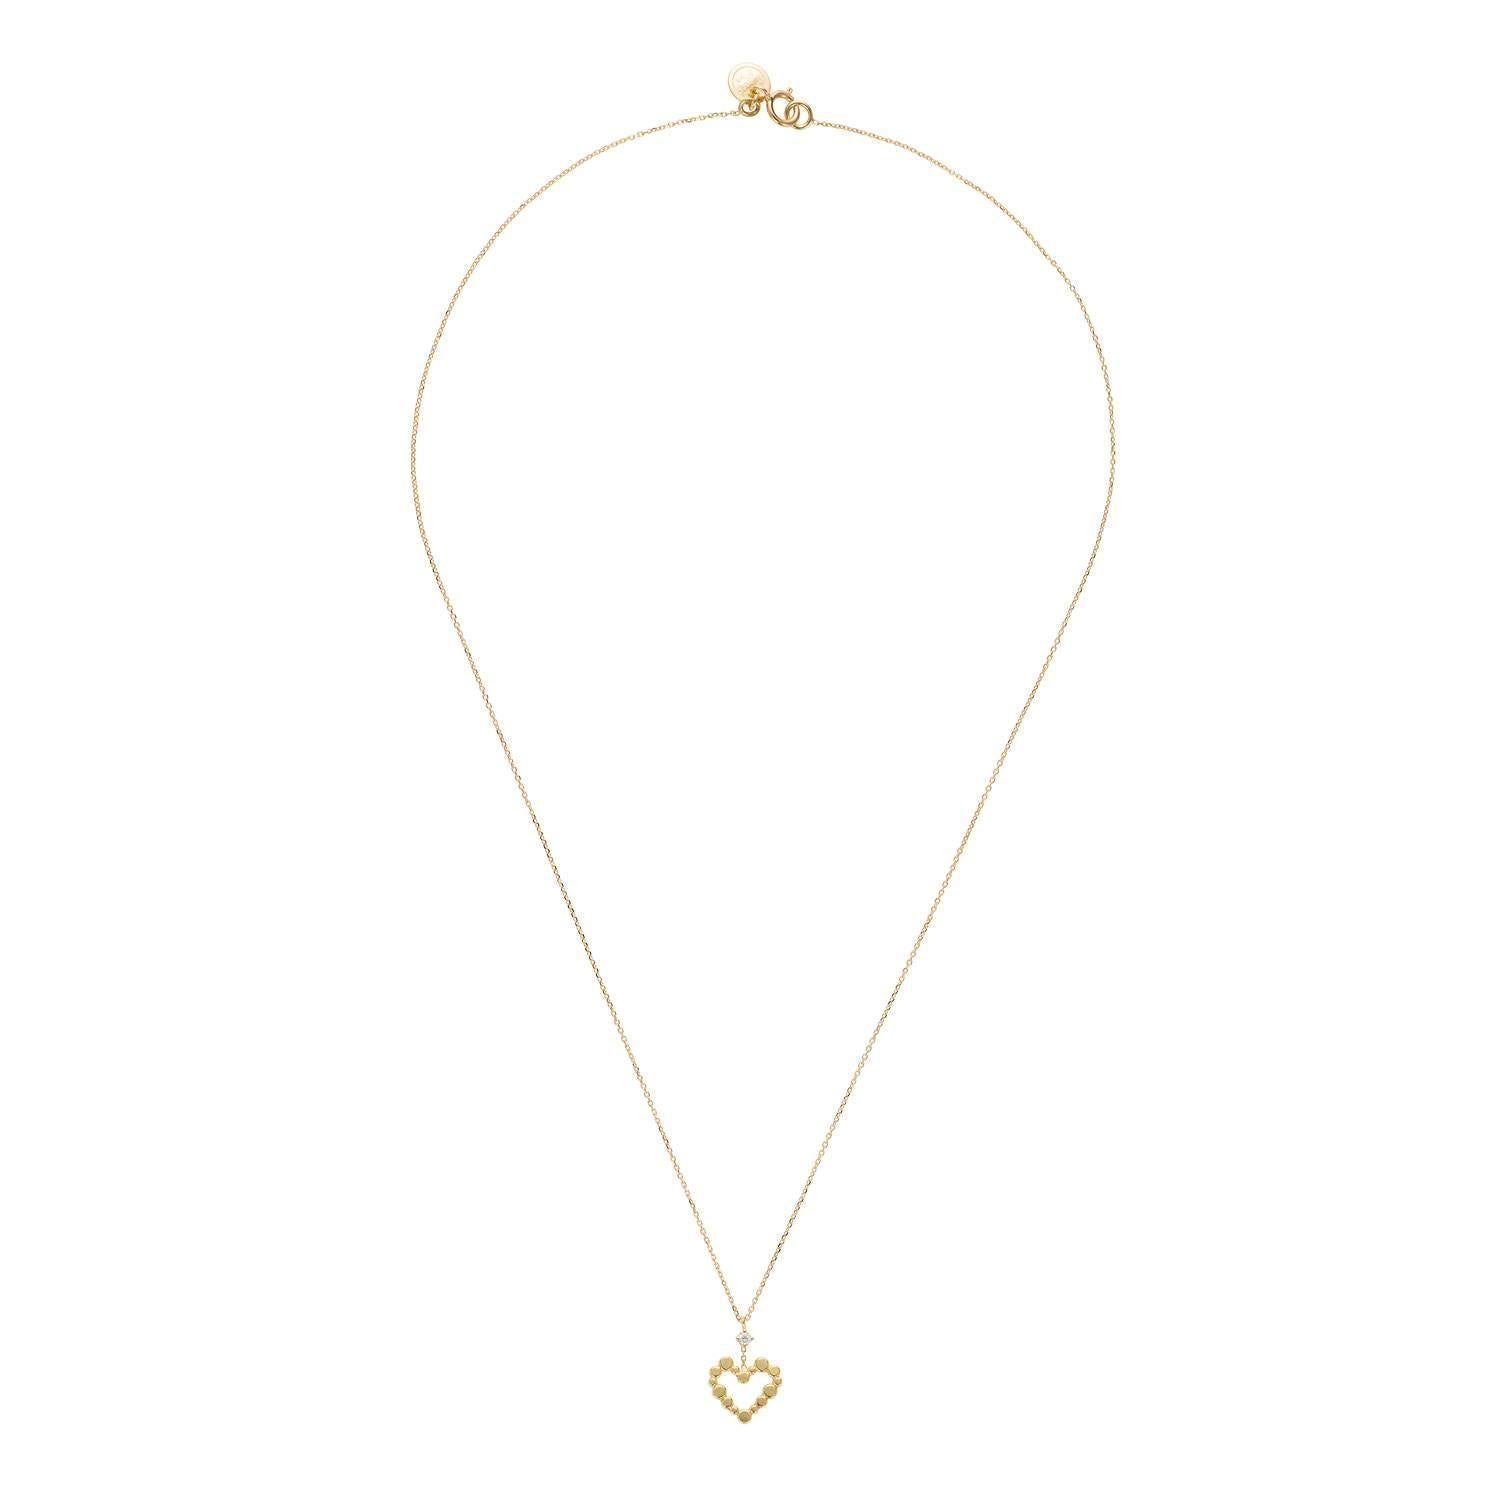 These beautiful charm necklaces are from Sweet Pea's new 'Love Letters' collection, with each motif made from 18k yellow gold with a claw set 0.02 carat diamond and threaded onto a fine chain. The handmade pendant is approximately 15mm tall and